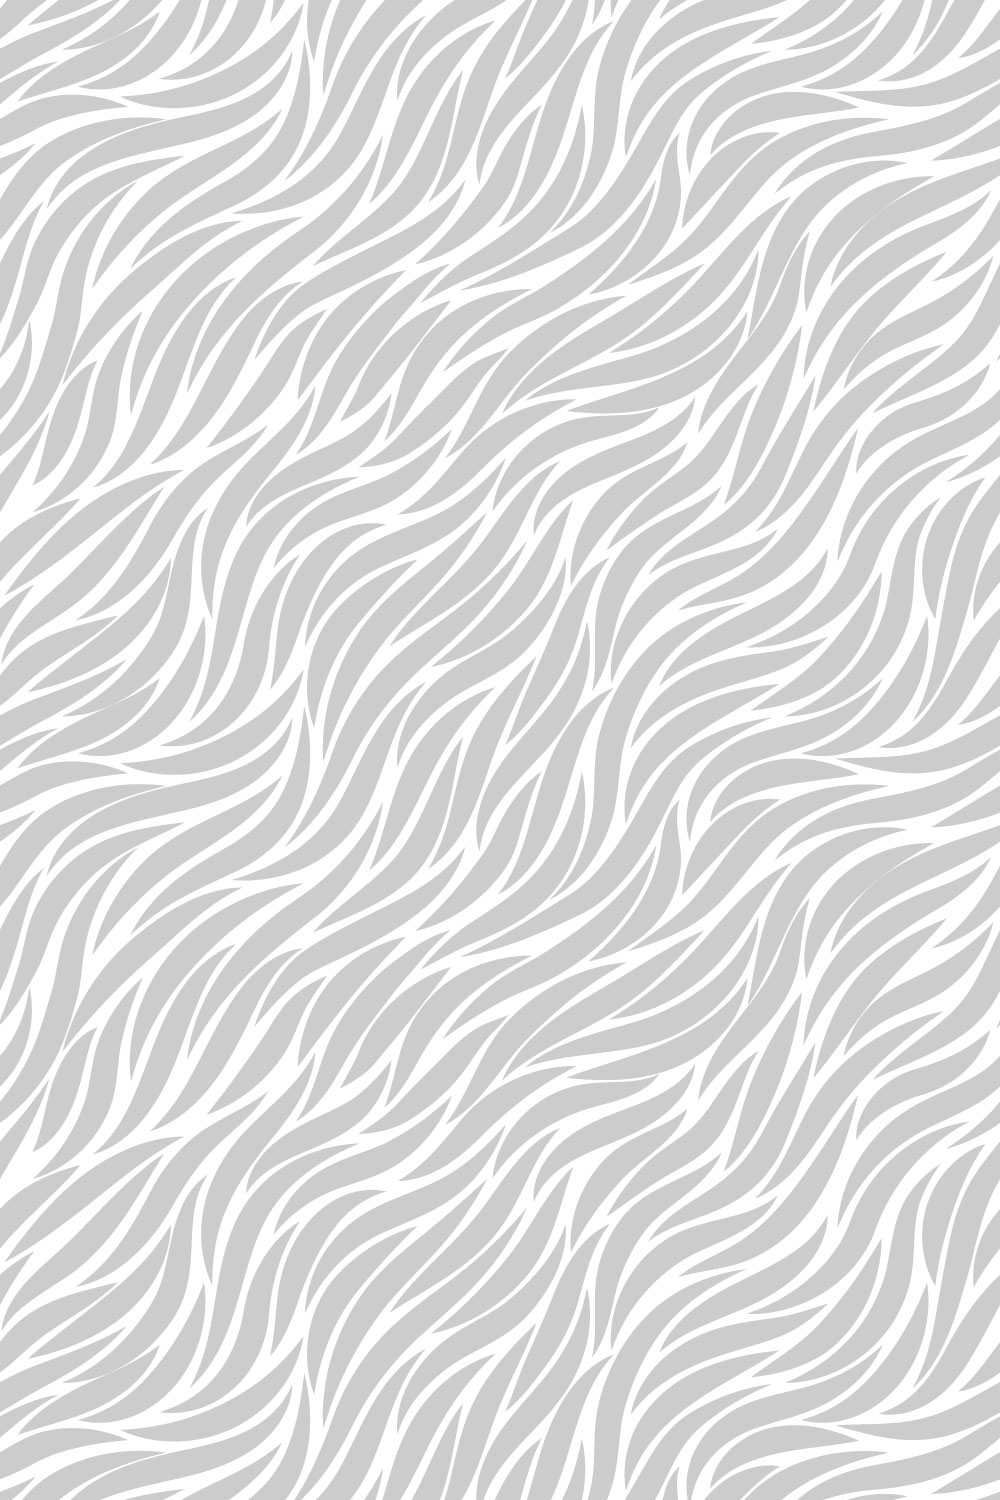 Minimalist Waves Seamless Patterns pinterest preview image.